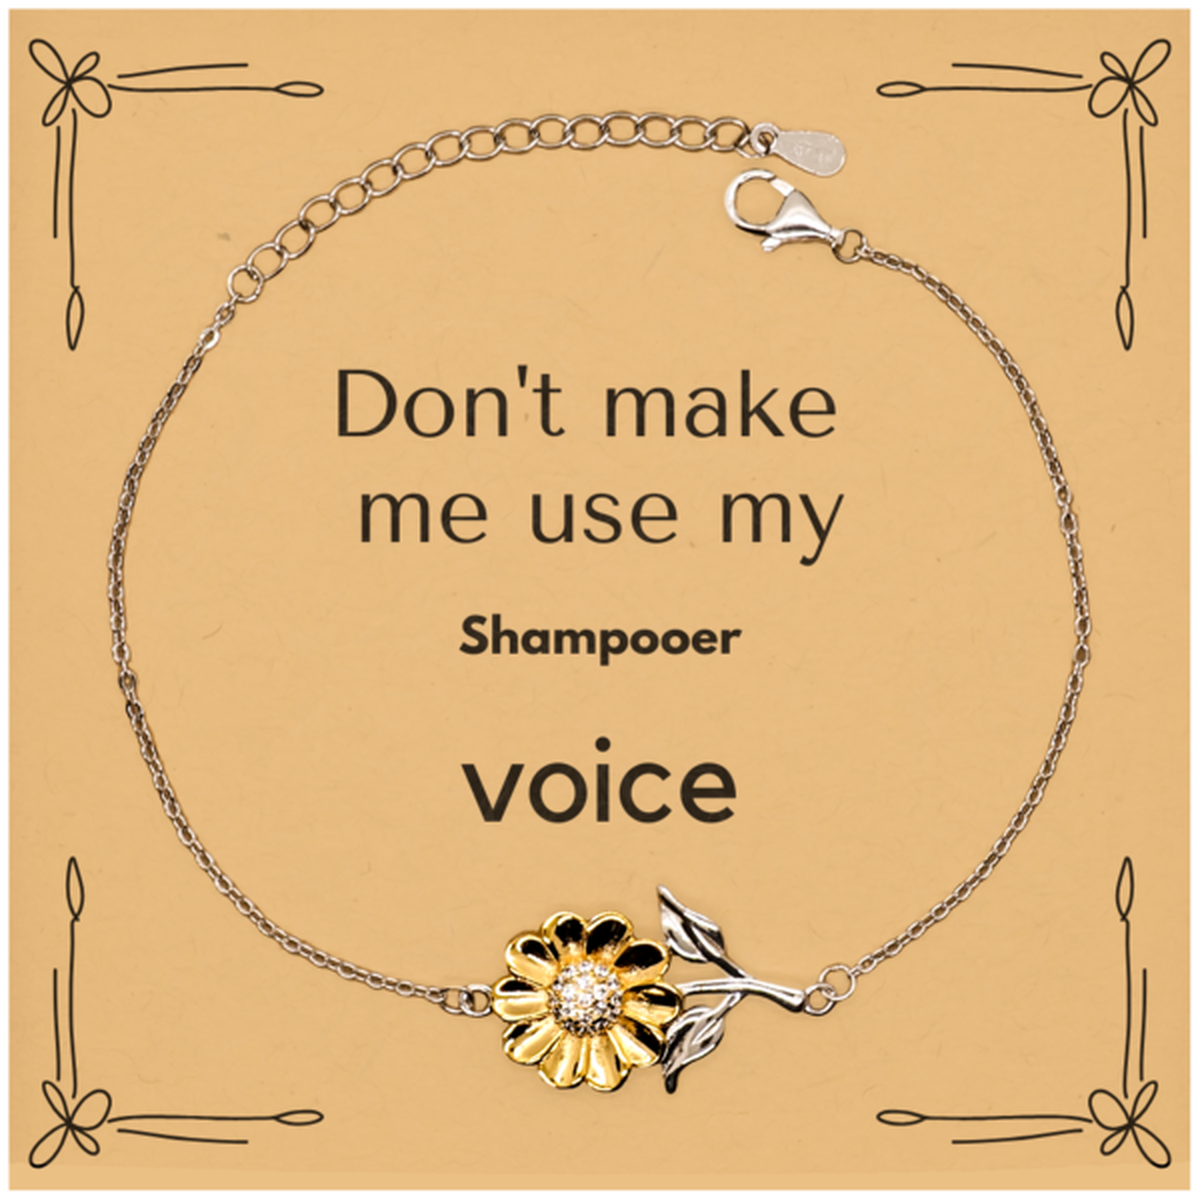 Don't make me use my Shampooer voice, Sarcasm Shampooer Card Gifts, Christmas Shampooer Sunflower Bracelet Birthday Unique Gifts For Shampooer Coworkers, Men, Women, Colleague, Friends